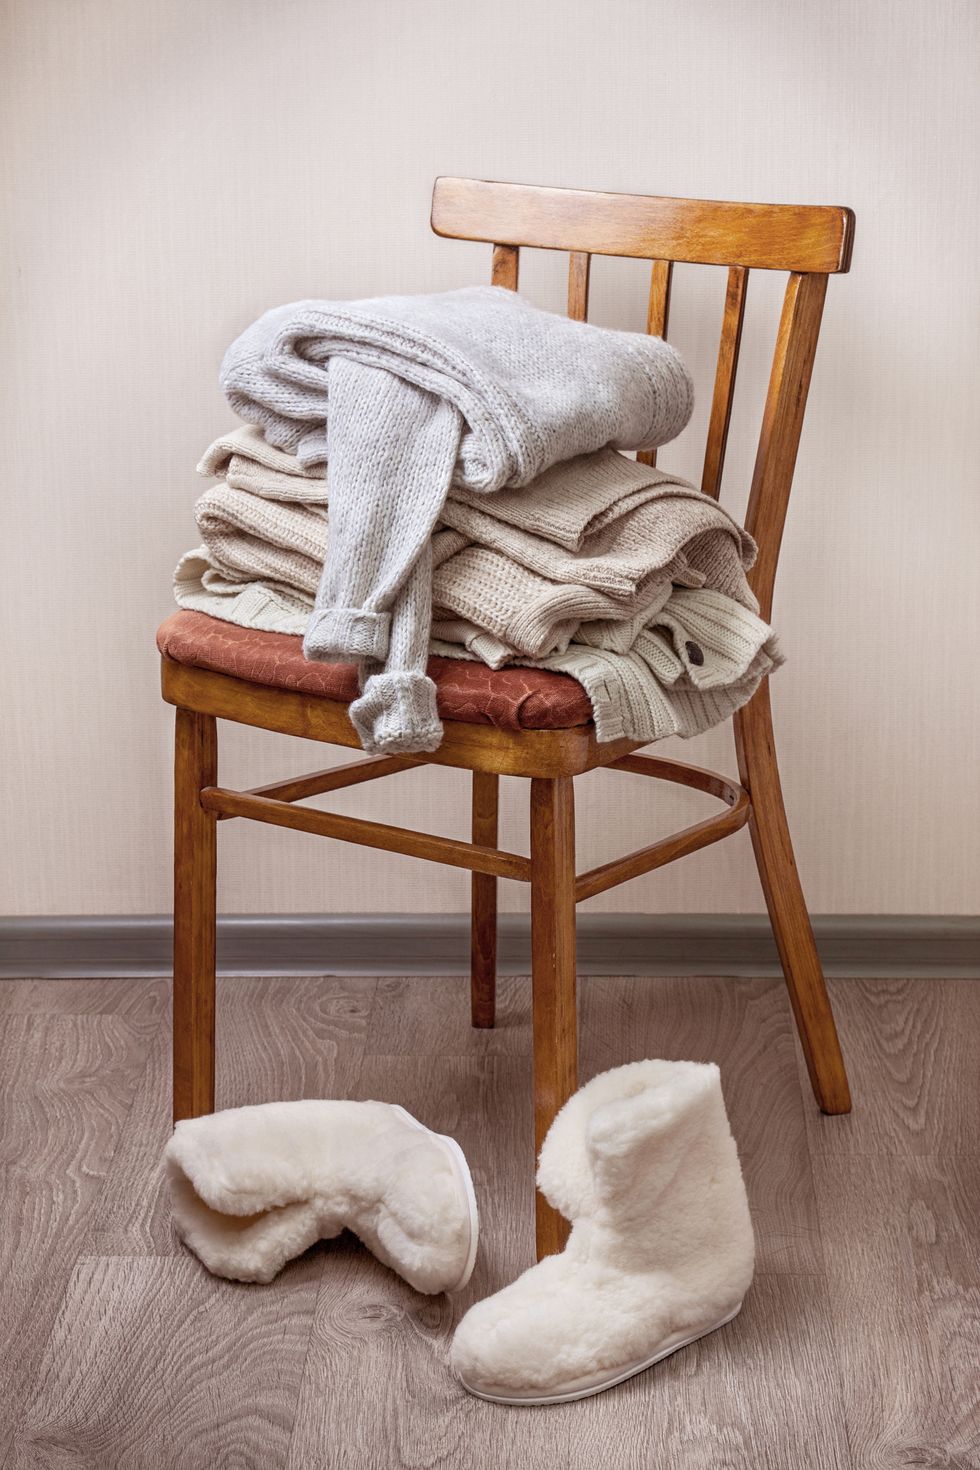 stack of warm clothes on the chair, pair of warm winter sheepskin slippers